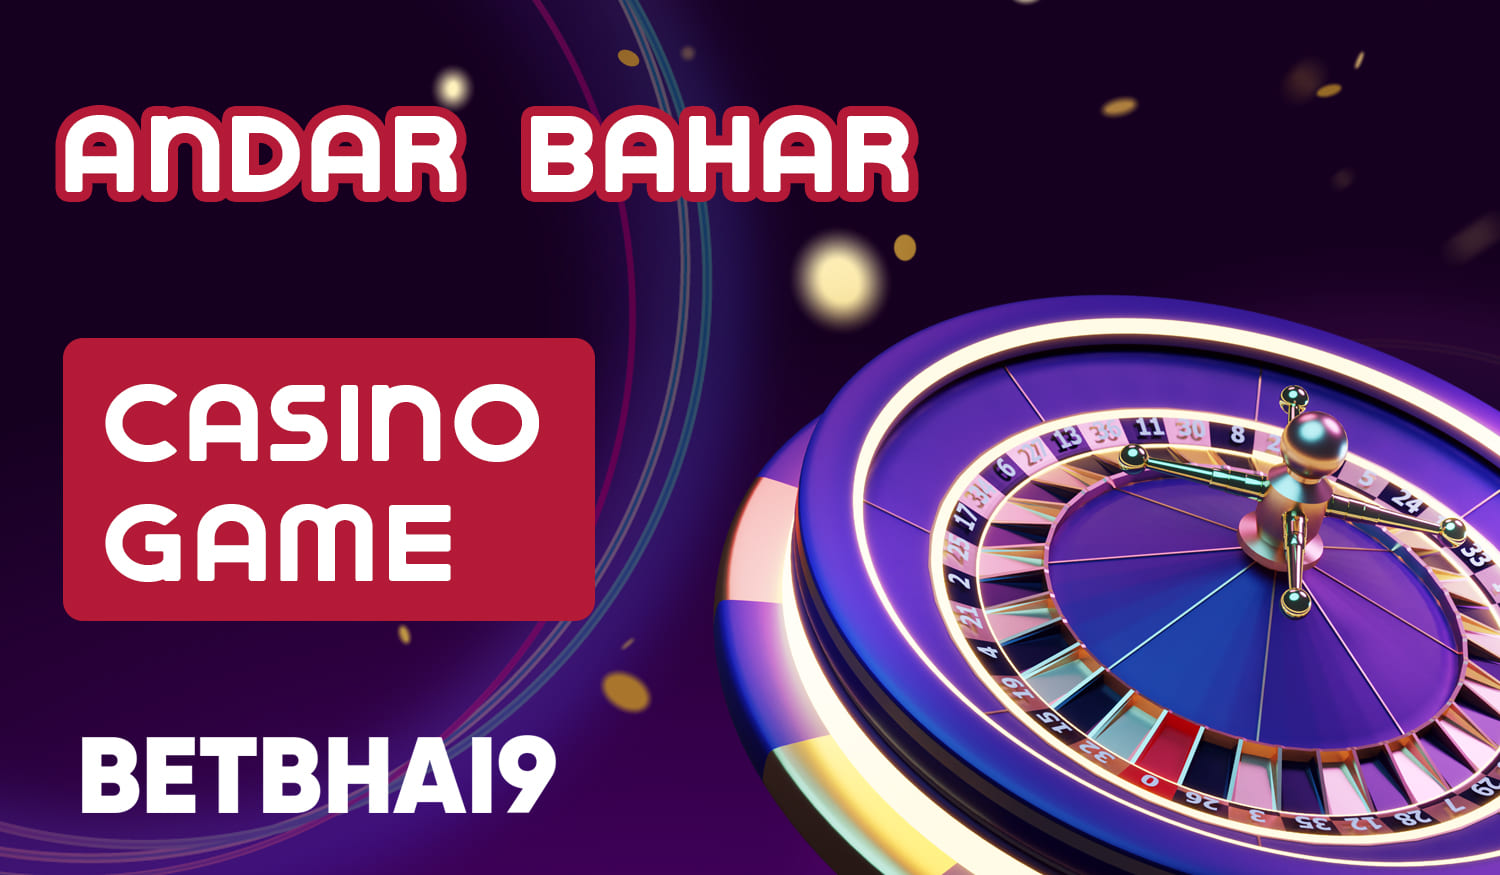 List of games in Betbhai9 online casino section available for Indian users